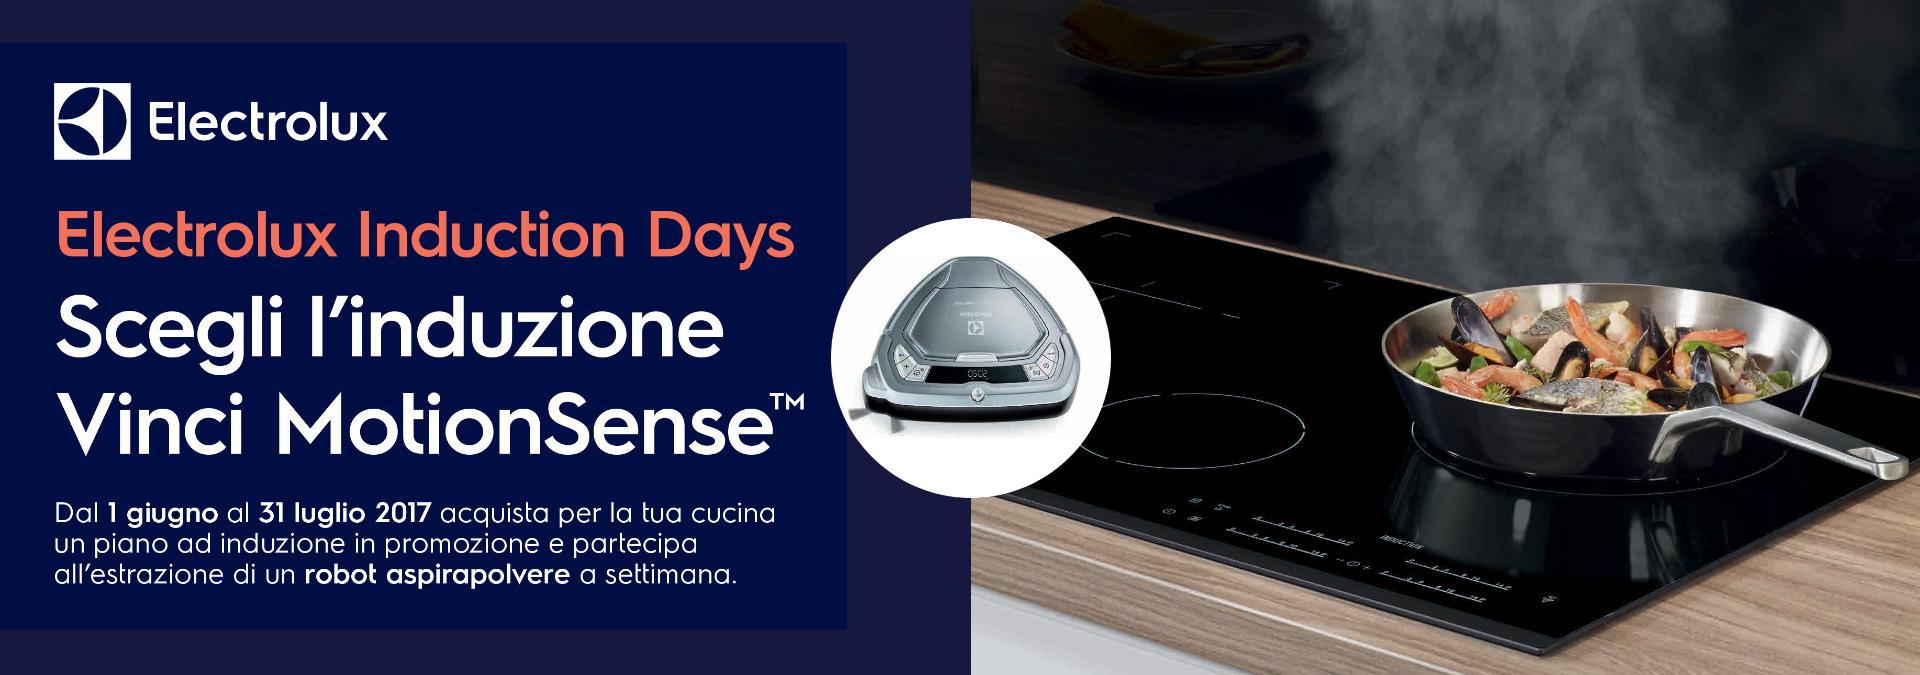 ELECTROLUX INDUCTION DAYS